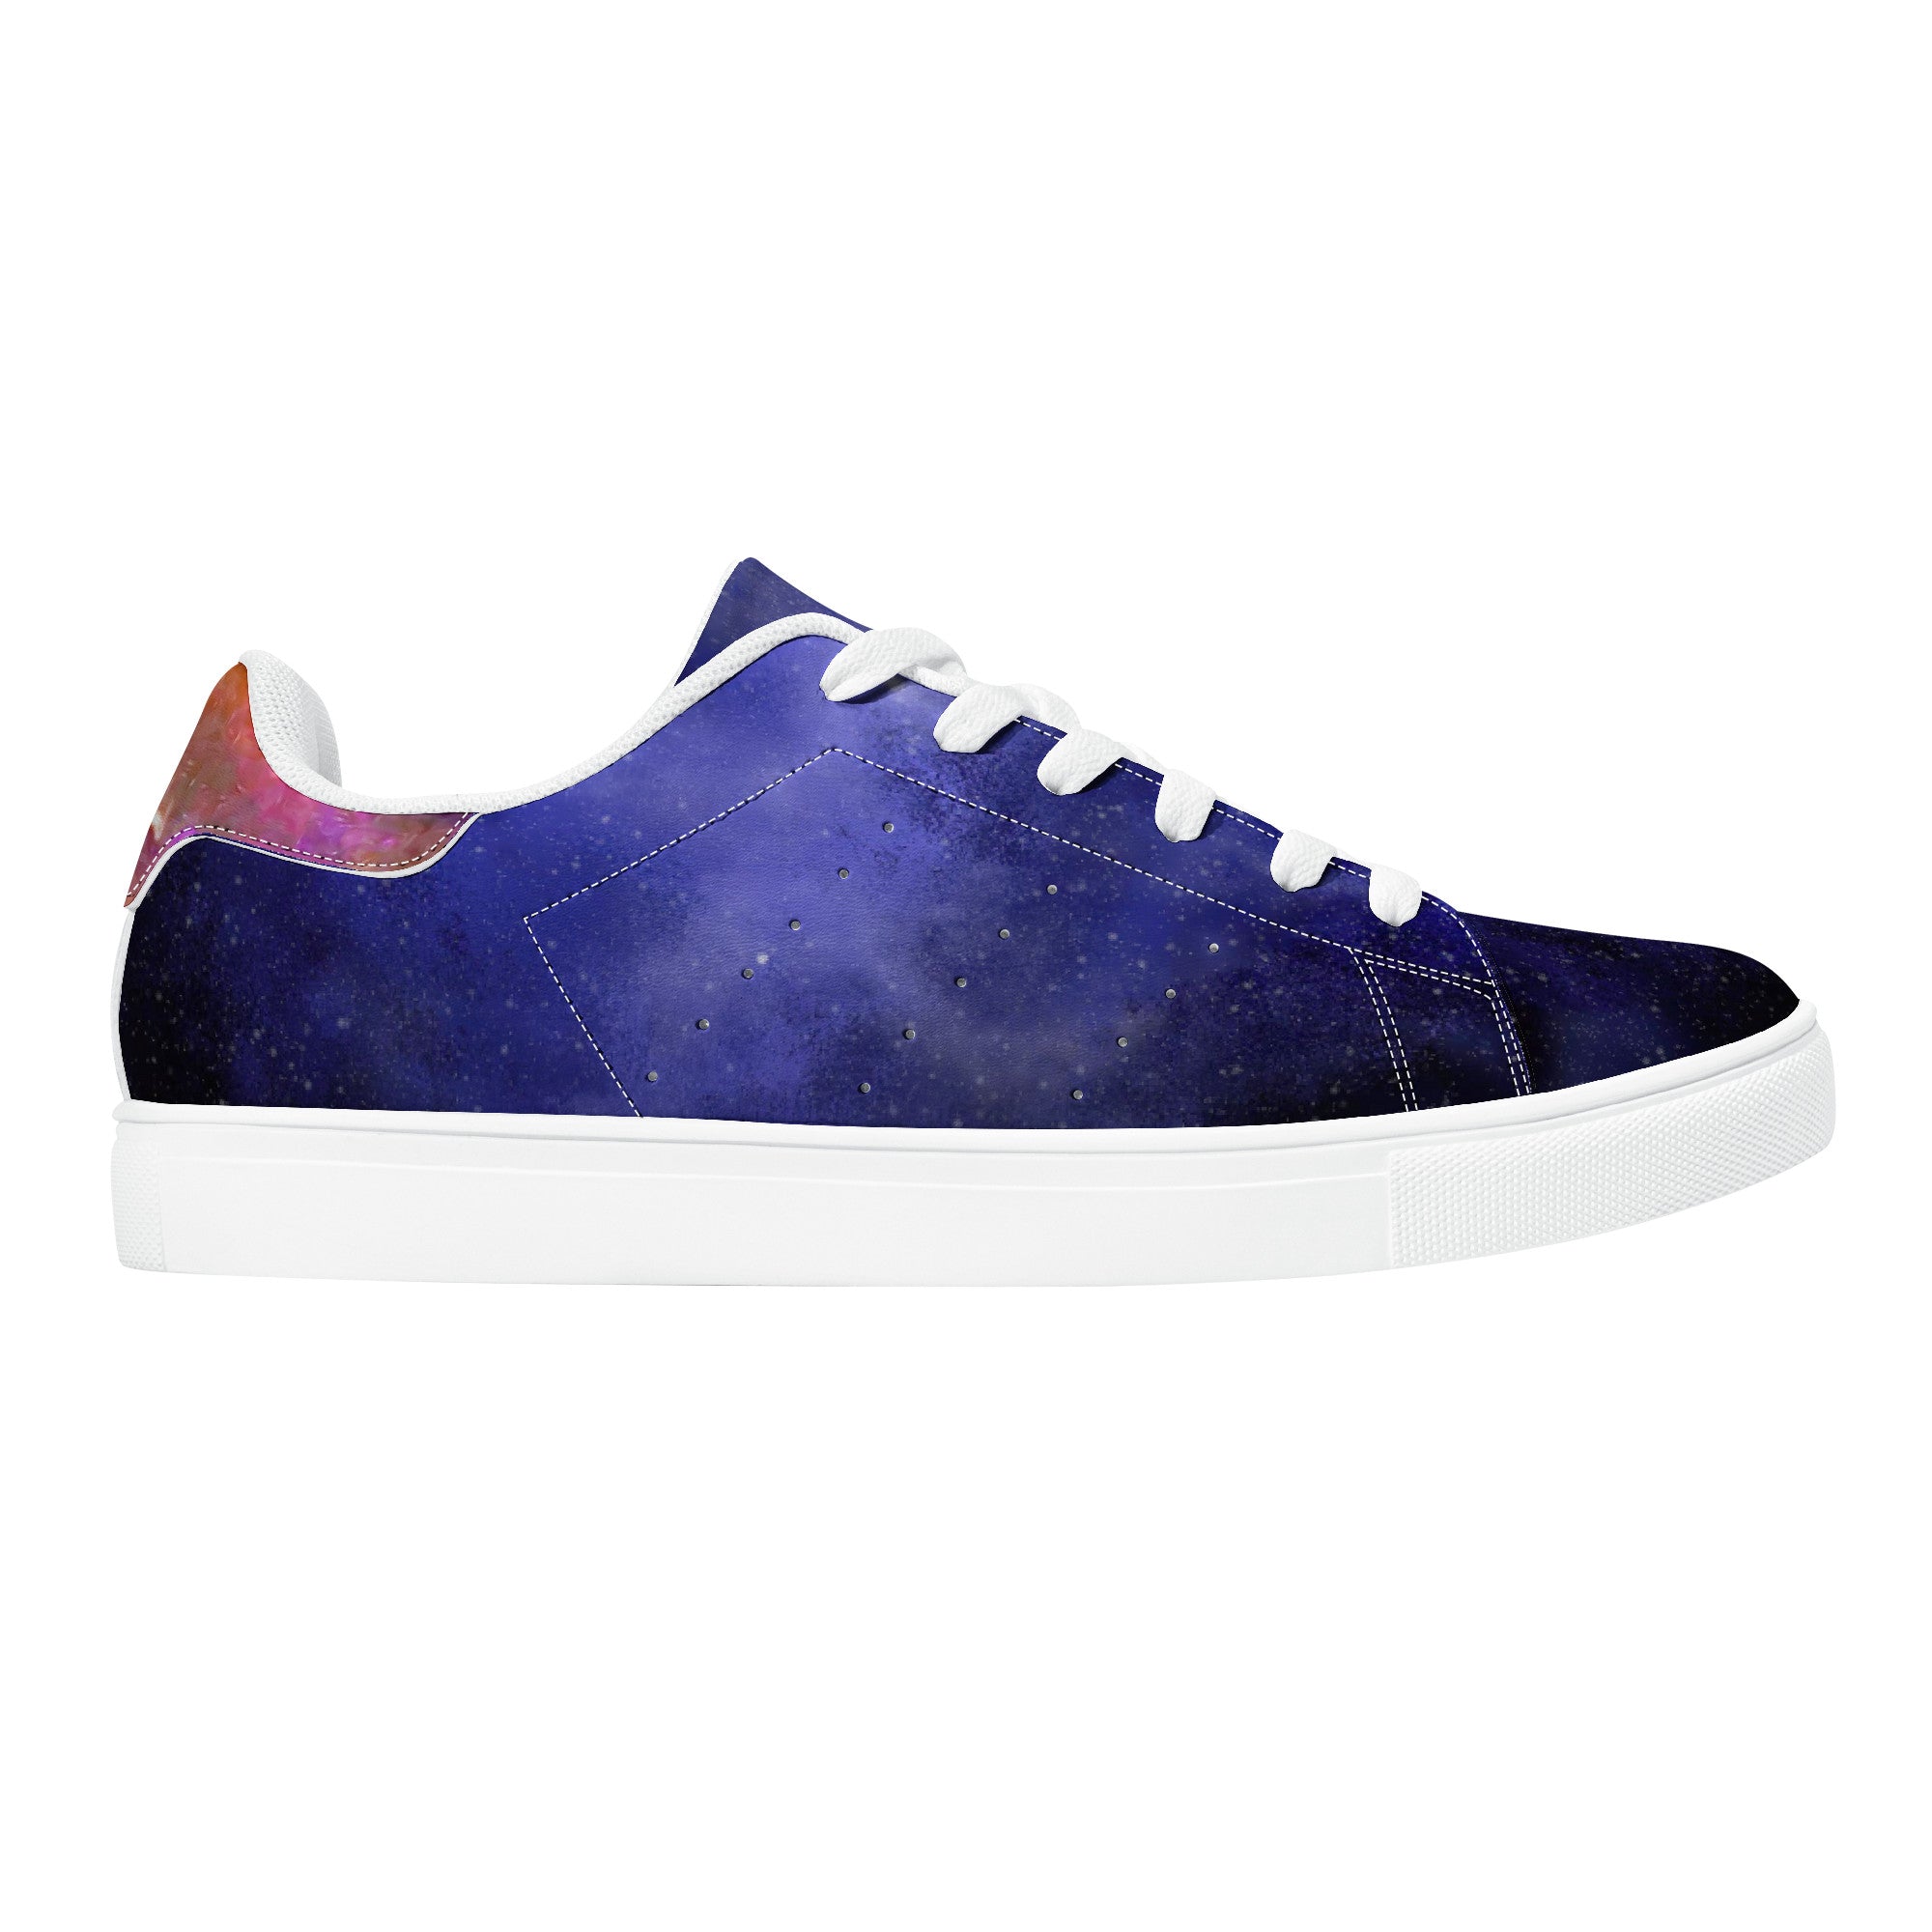 Cosmos by Denise Dundon | Low Top Customized | Shoe Zero